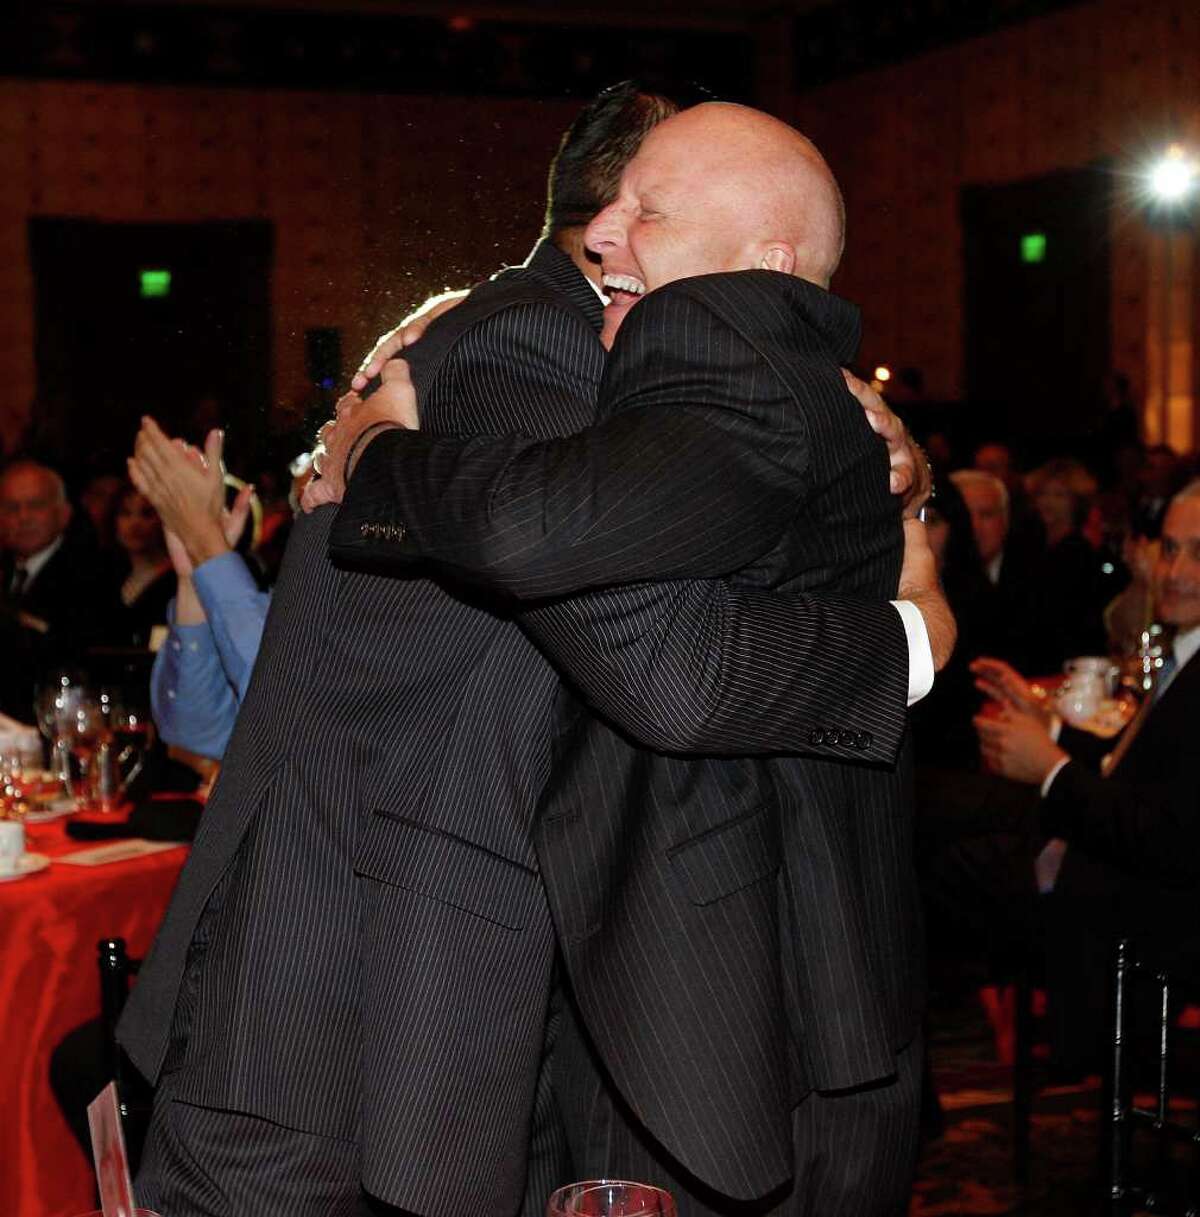 Harlandale ISD Superintendent Robert Jaklich, right, hugs Board President Anthony Alcoser after the district won the Large District category of the 10th annual H-E-B Excellence in Education Awards in Austin on Sunday. JERRY LARA/glara@express-news.net